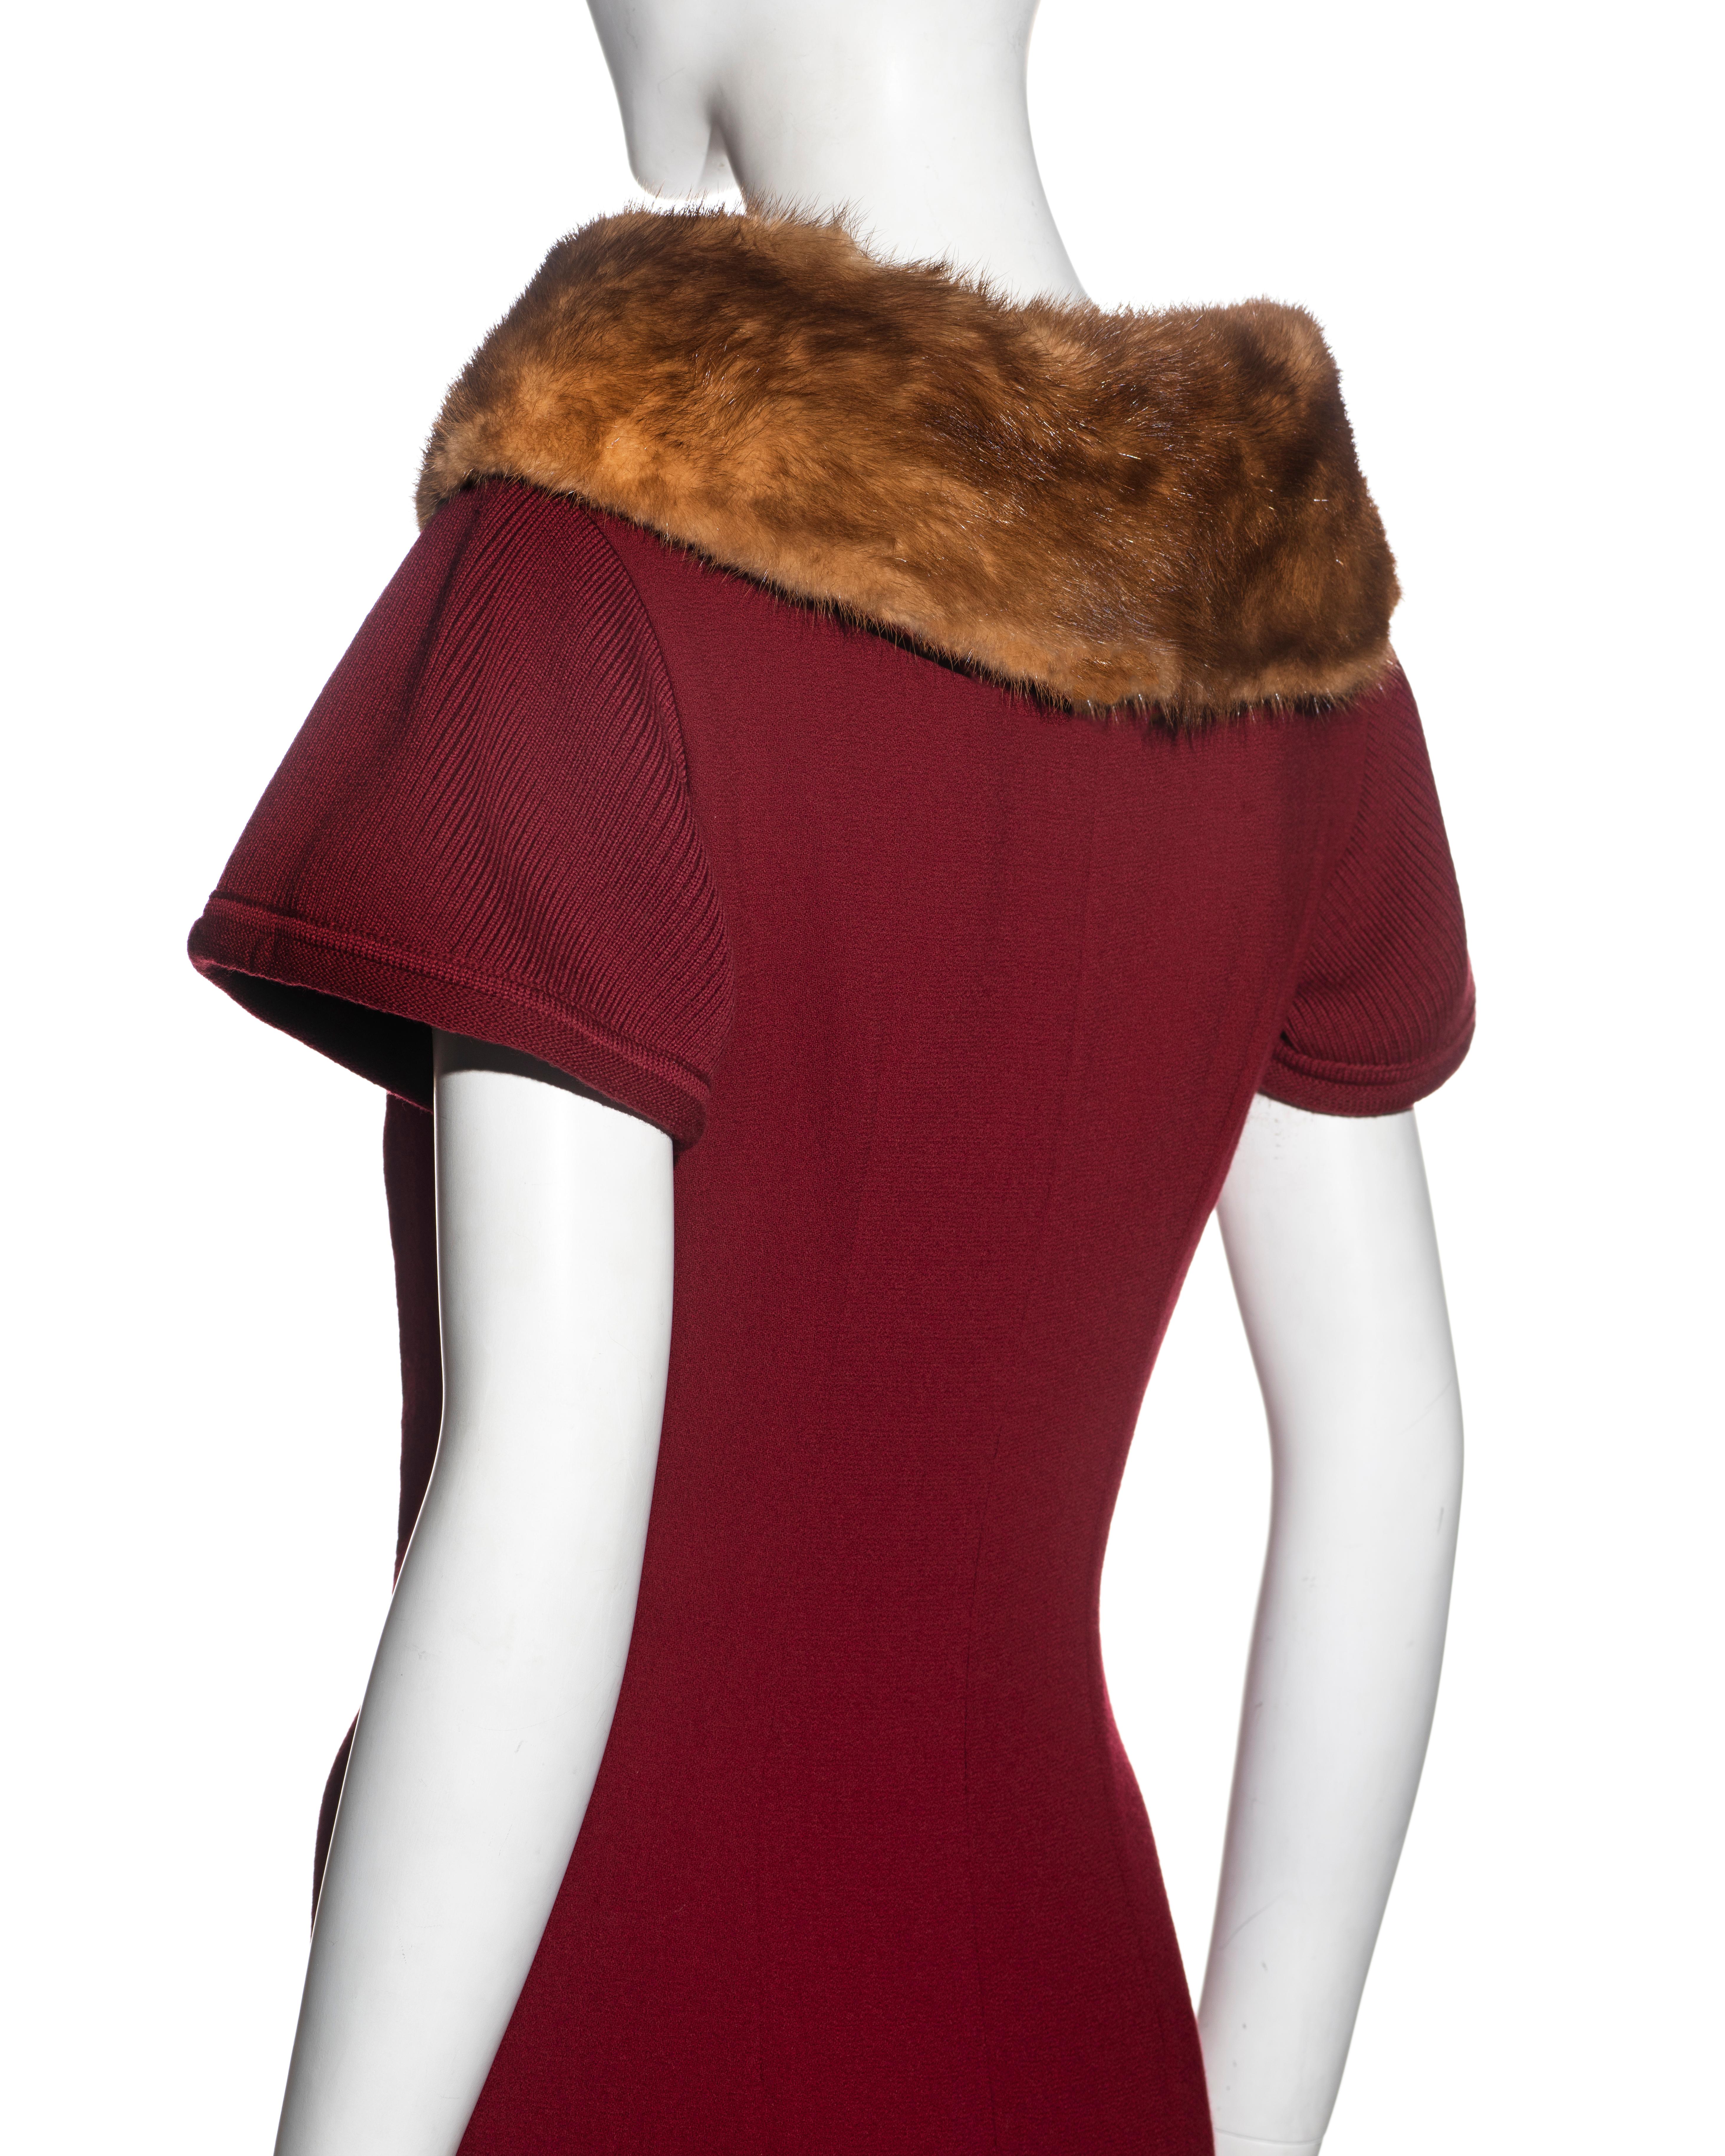 Christian Dior by John Galliano red wool crepe dress with mink fur trim, fw 1999 For Sale 1